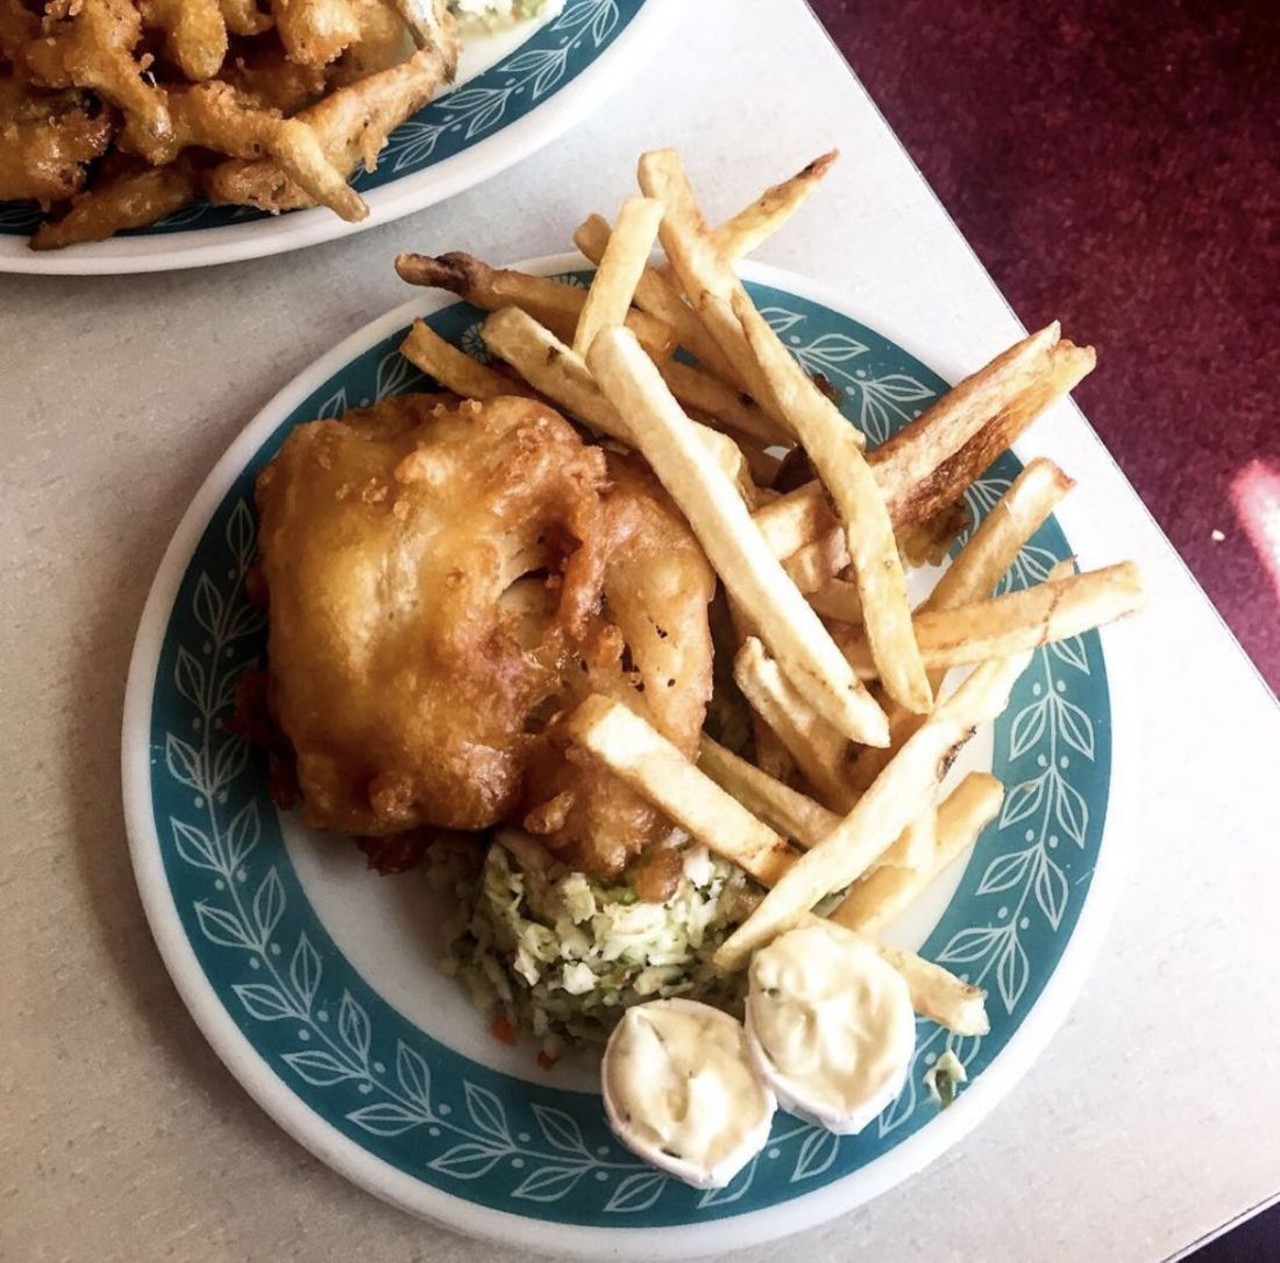 Scotty Simpson&#146;s Fish and Chips
22200 Fenkell Ave, Detroit, MI 48223
You can&#146;t beat the prices at Scotty Simpson&#146;s. All kids meals are $3 and are served with chips and a drink.
Photo courtesy of @stockyarddetroit